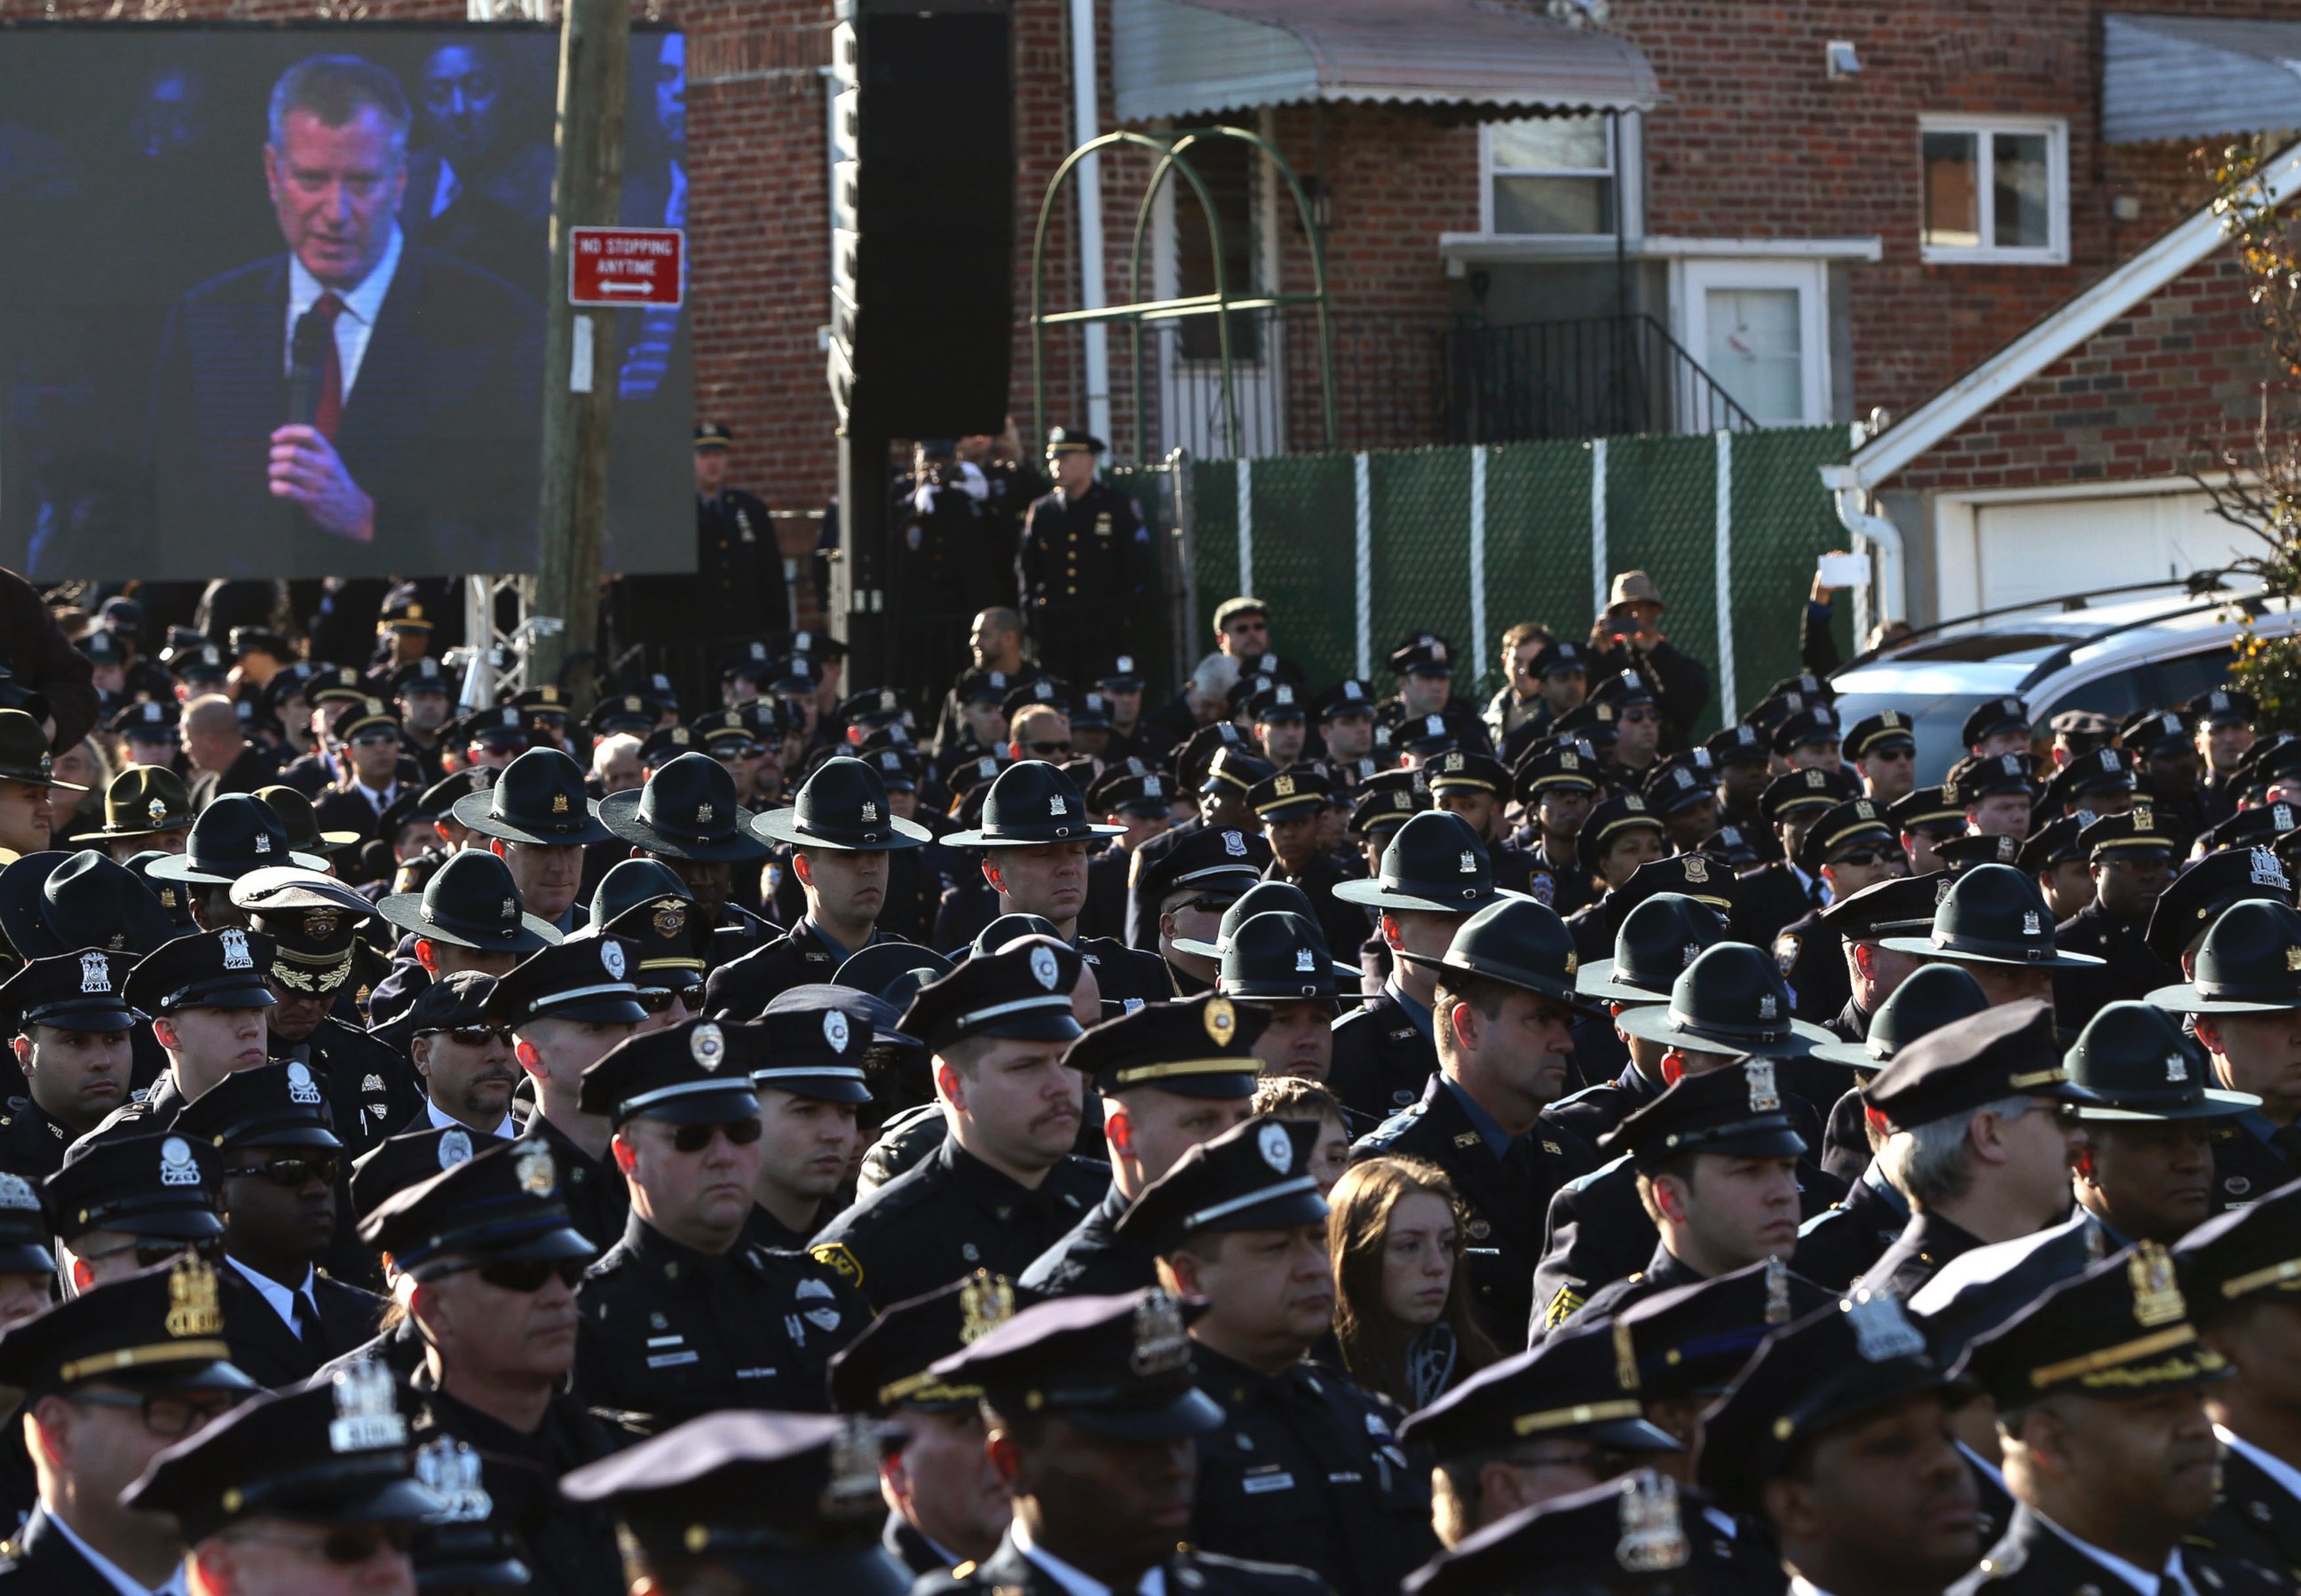 PHOTO: Law enforcement officers turn their backs on a video monitor as New York City Mayor Bill de Blasio speaks during the funeral of slain New York Police Department officer Rafael Ramos in the Queens borough of New York on Dec. 27, 2014.